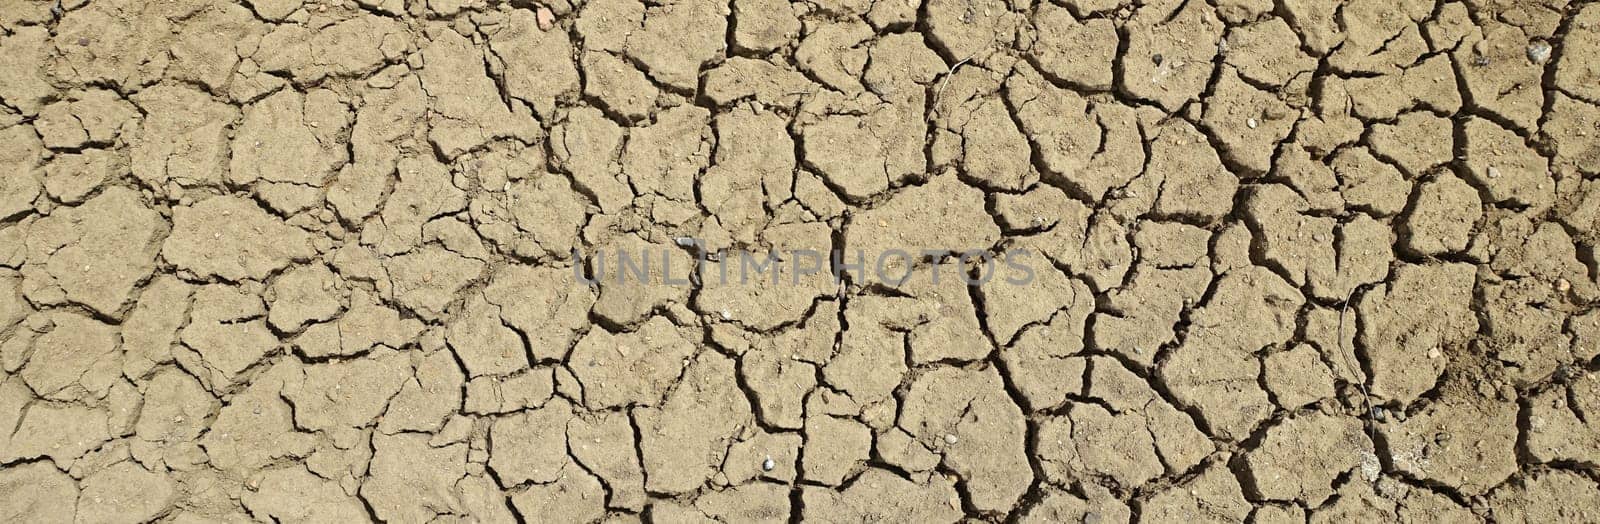 close- up,Cracking and splitting of soils due to thirst-soil erosion and drought, by nhatipoglu